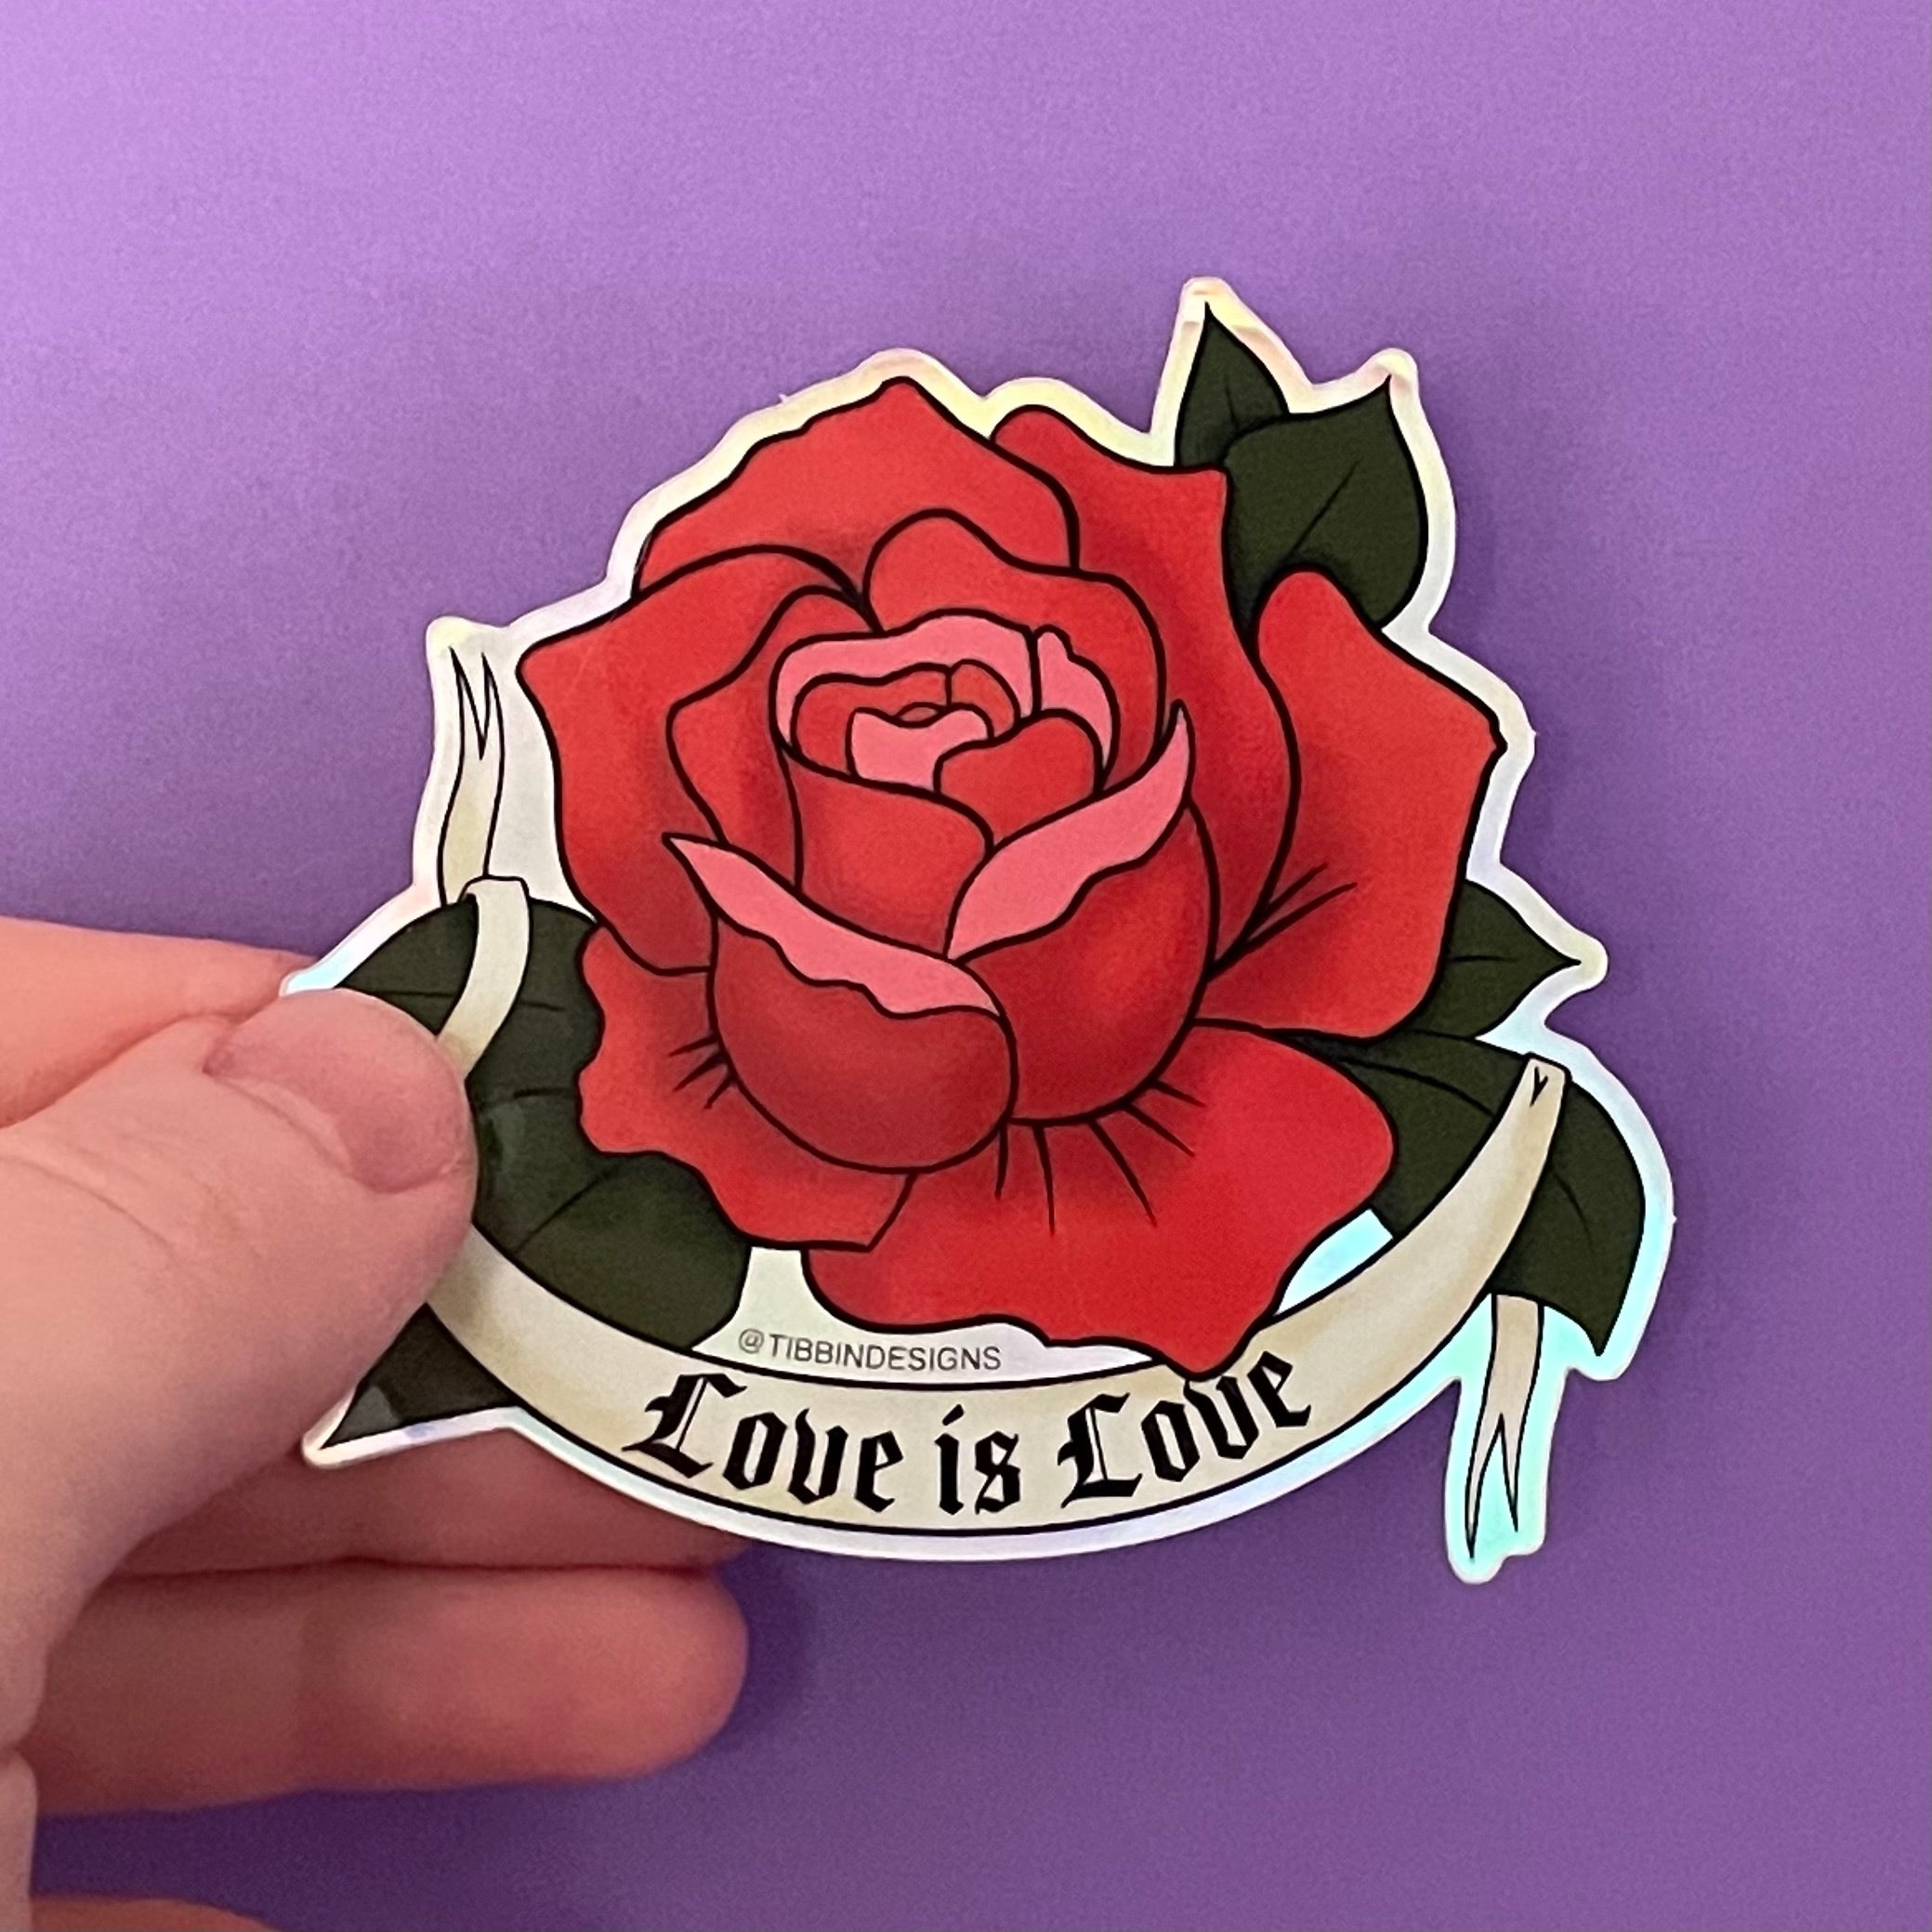 A holographic sticker of a red rose drawn in the traditional American tattoo style with a tattoo banner that says &quot;Love Is Love&quot; in a gothic font. The red rose has pink petals as accents.